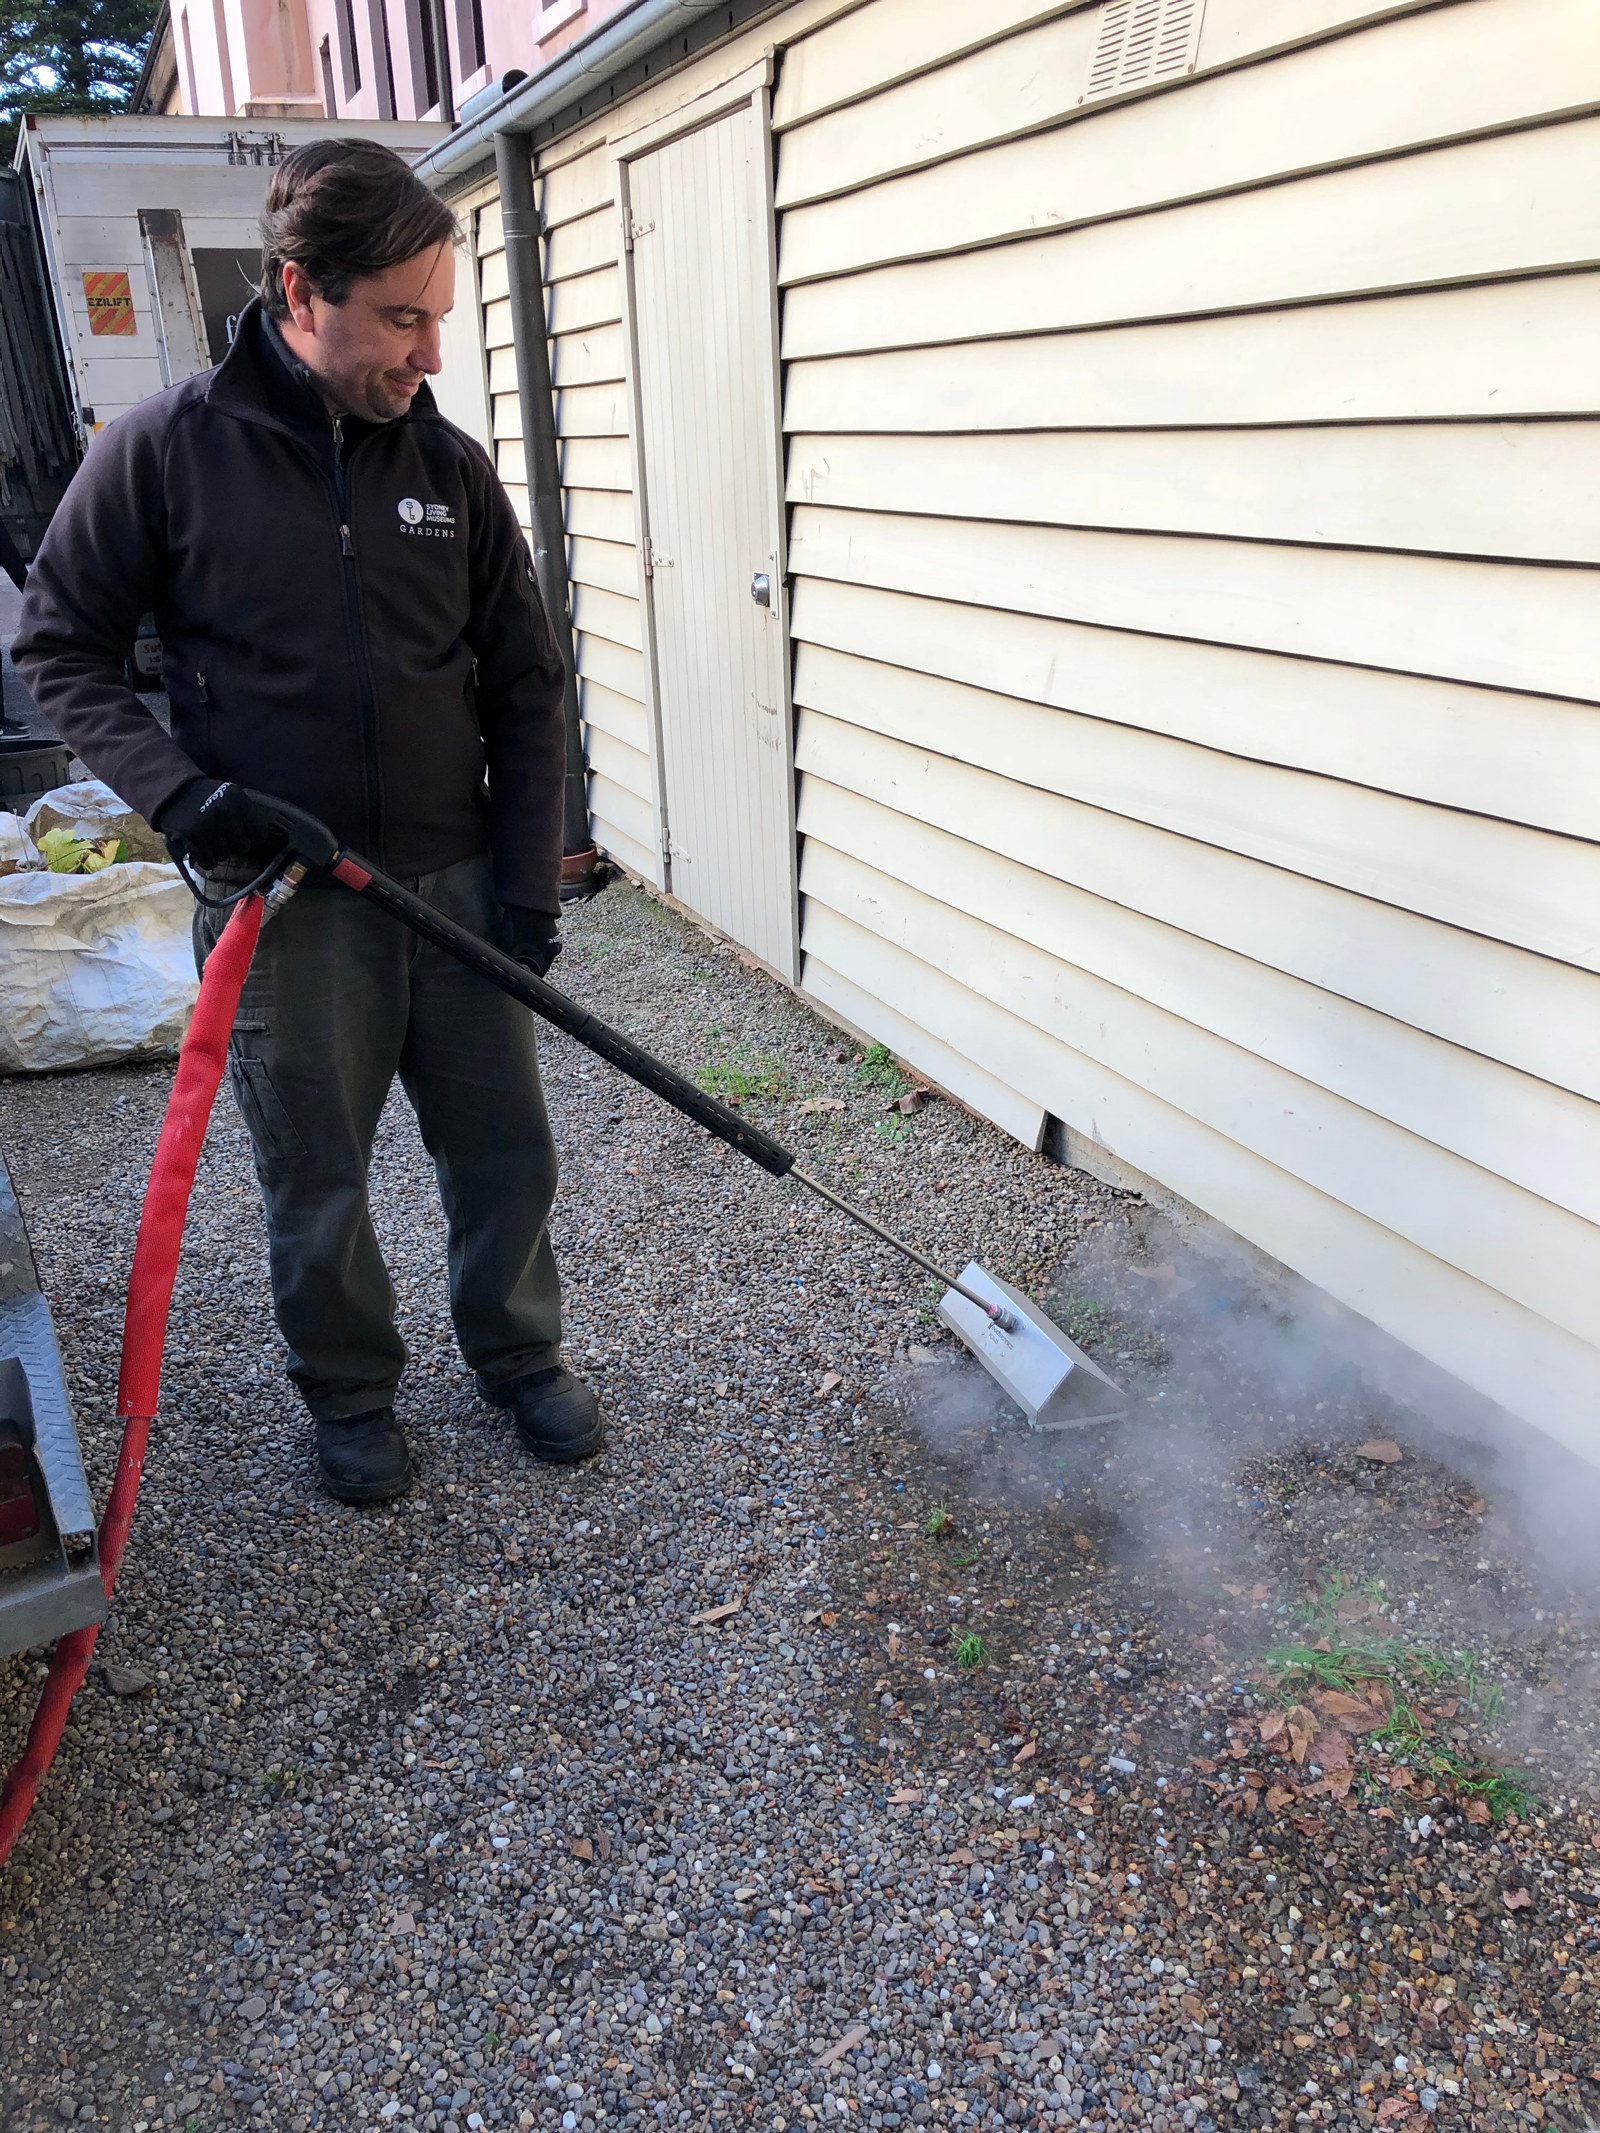 A SLM staff member uses a steam weeding machine to kill weeds alongside the driveway at the mint.